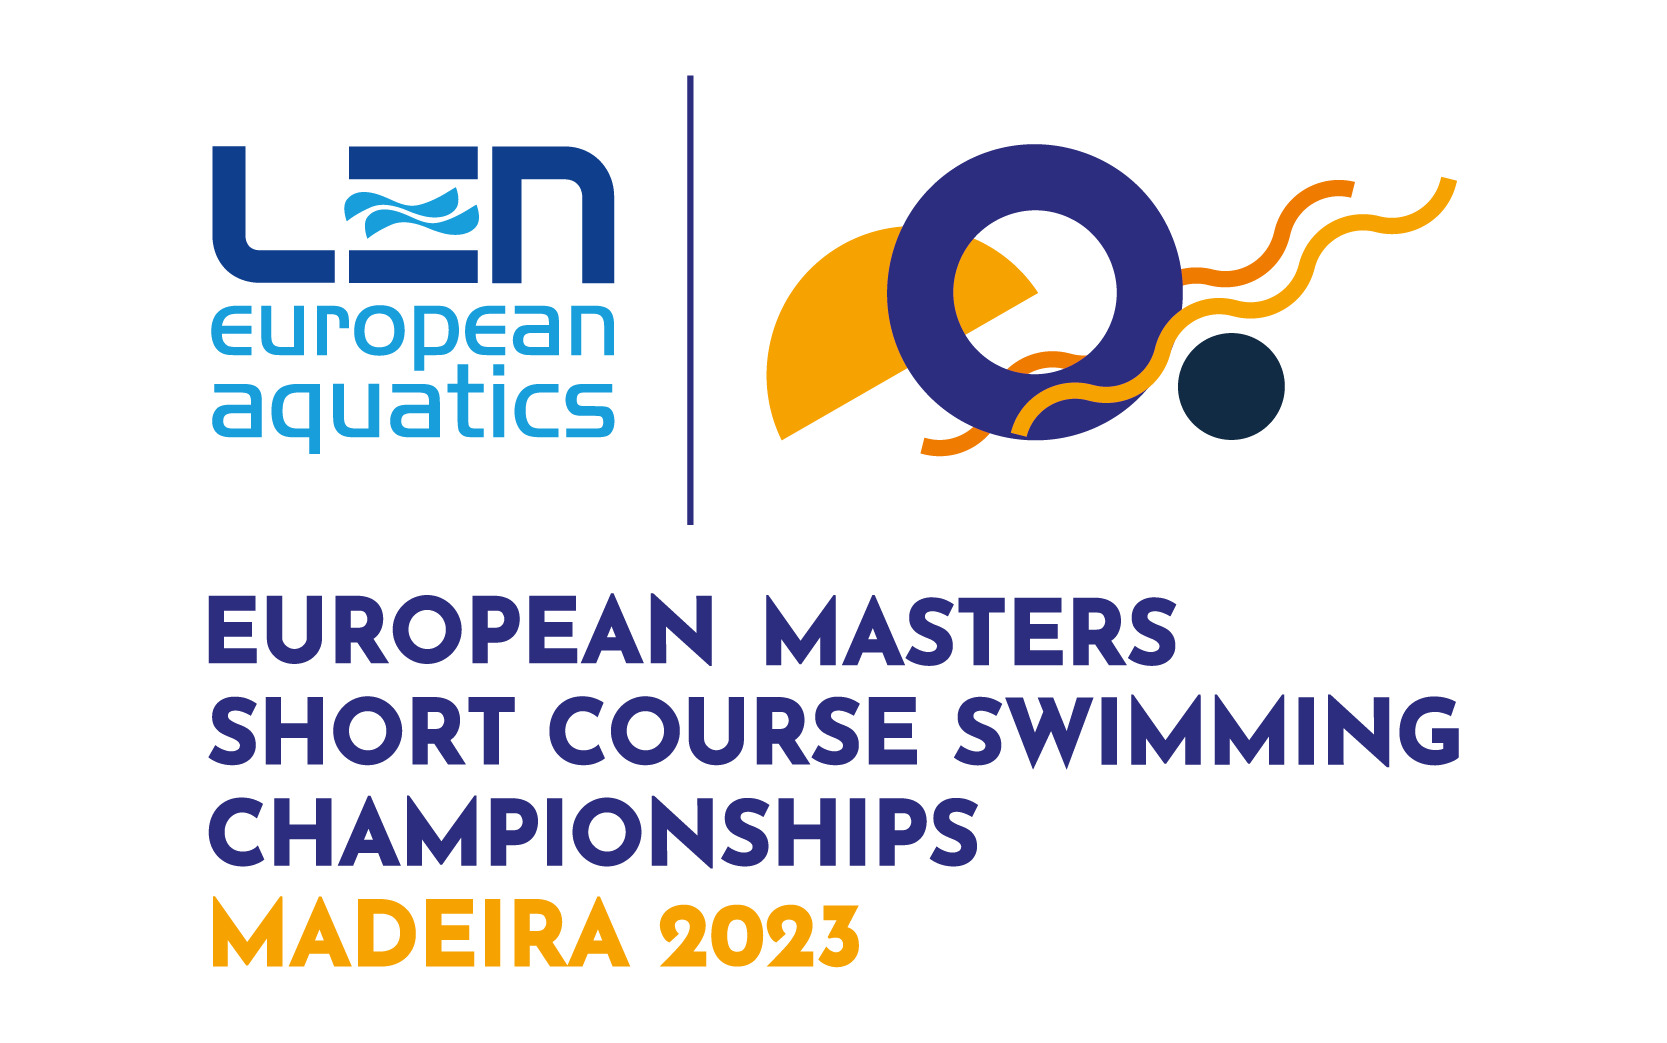 Report performance European swimming Masters short course 2023 Madeira